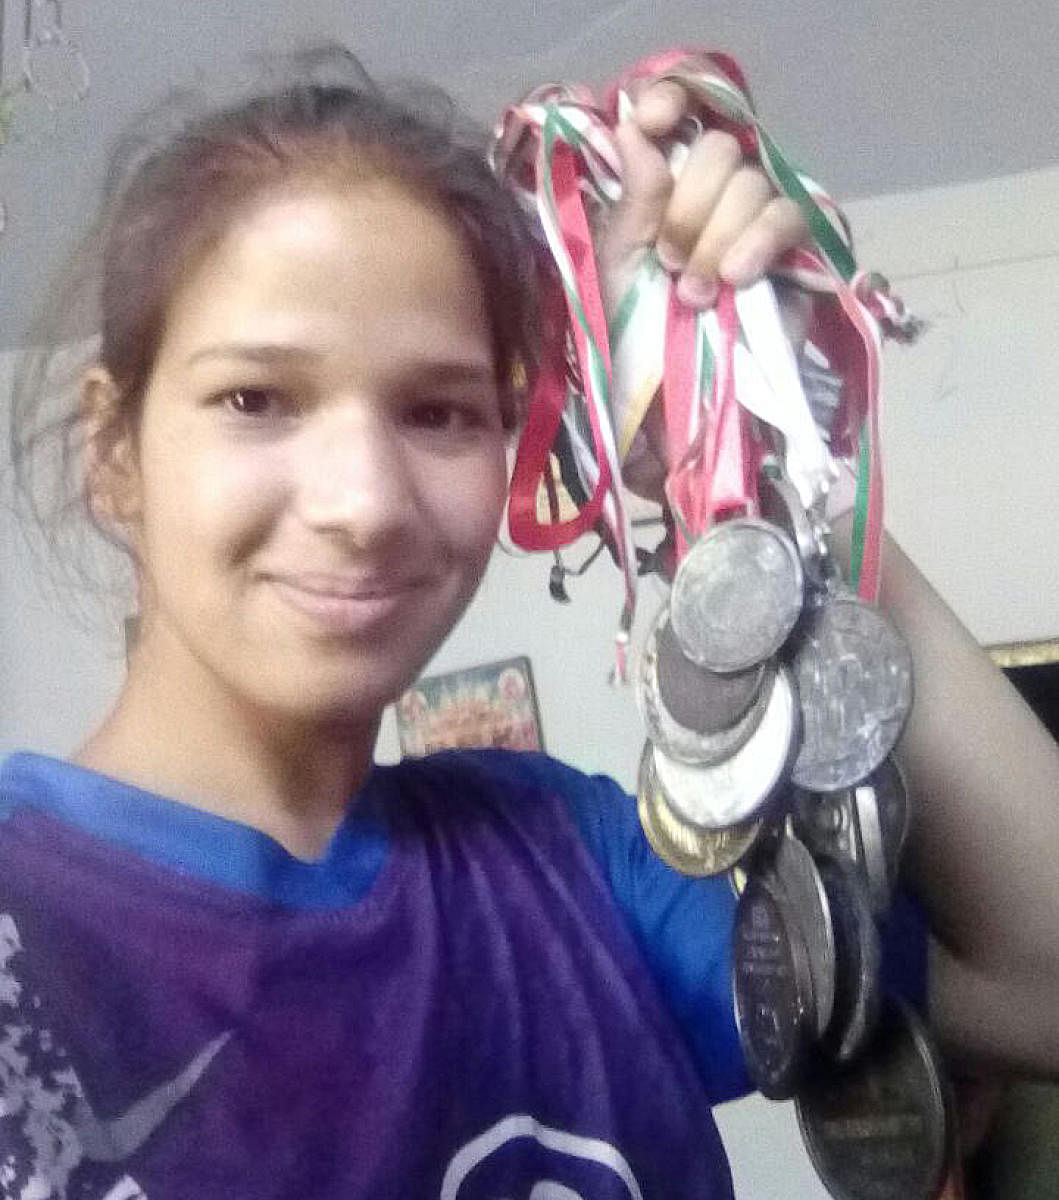 Garima Joshi, an athelete from Uttarakhand who met with an accident near Udupi.